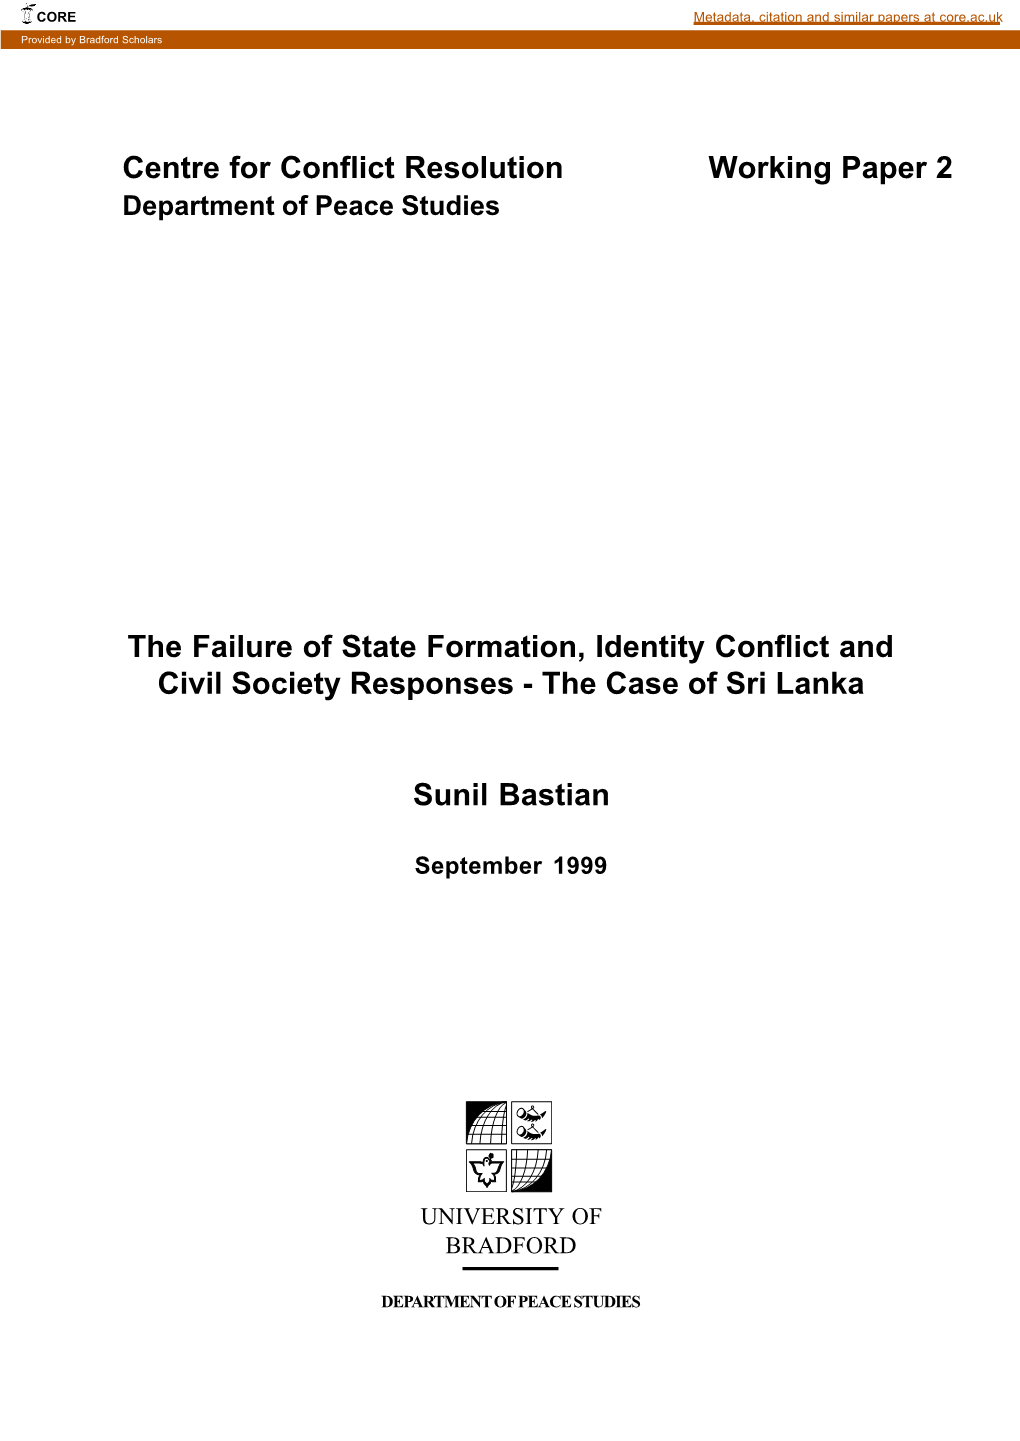 Centre for Conflict Resolution Working Paper 2 the Failure Of